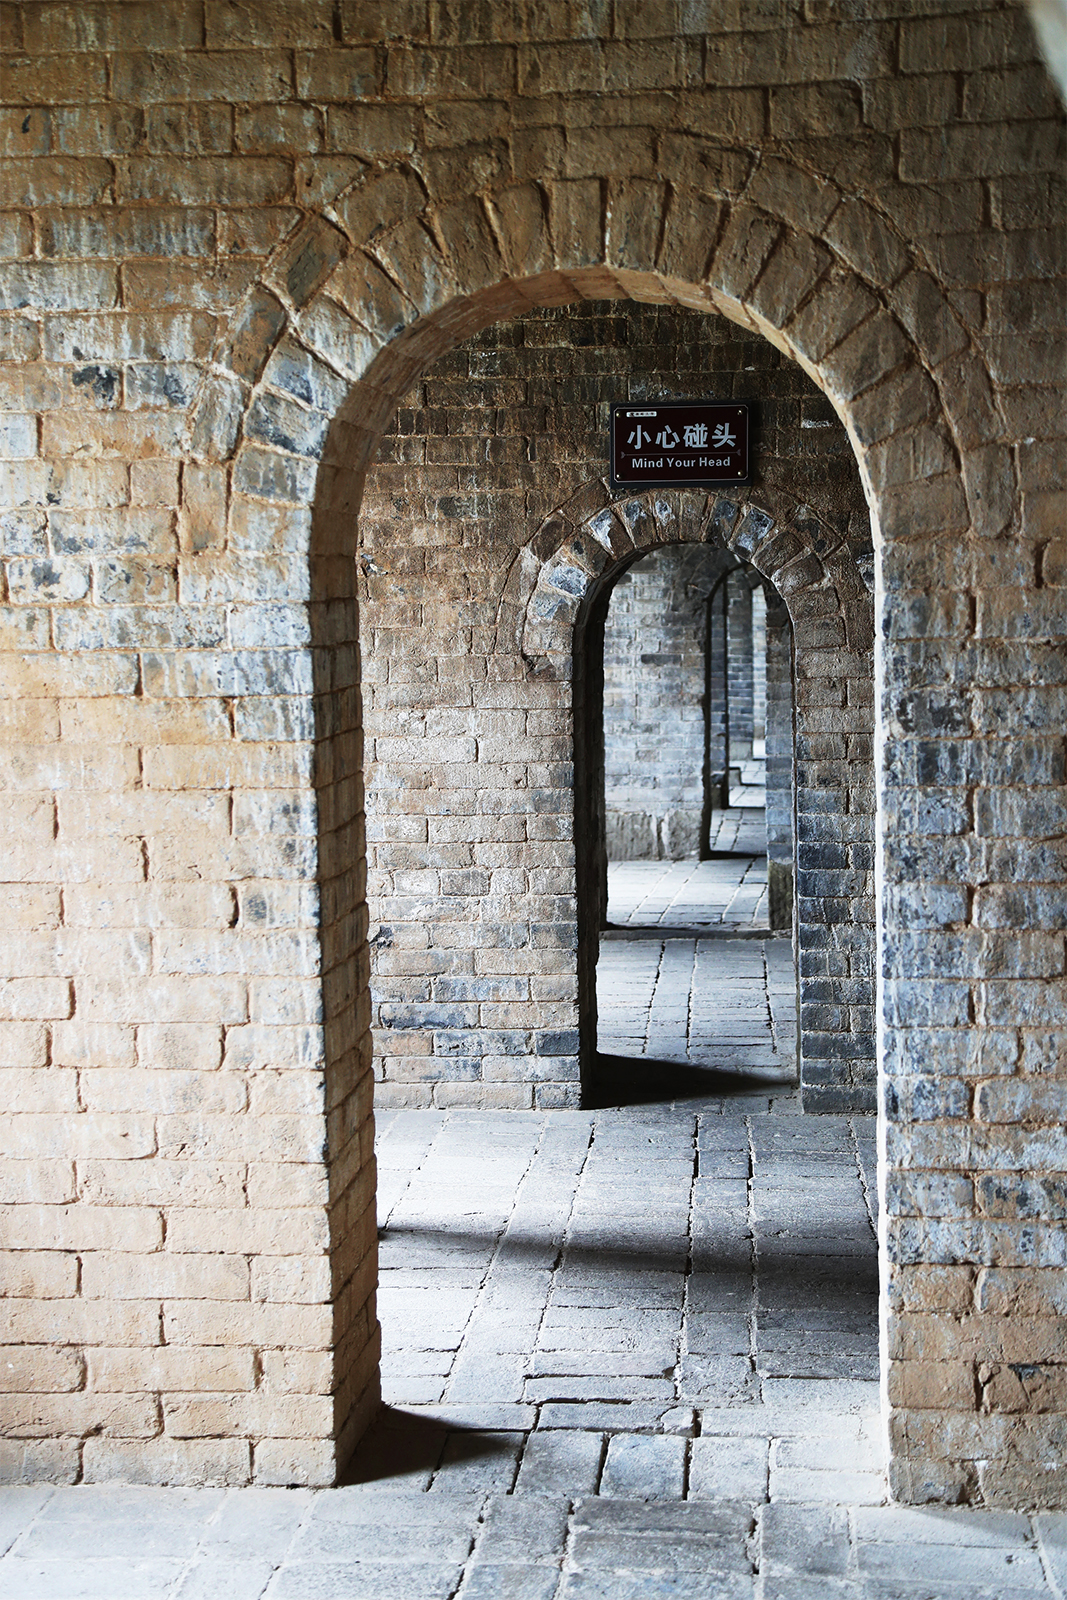 Xiangyu Ancient Castle features arched passages and corridors where soldiers could hide and defend the fortress. /CGTN